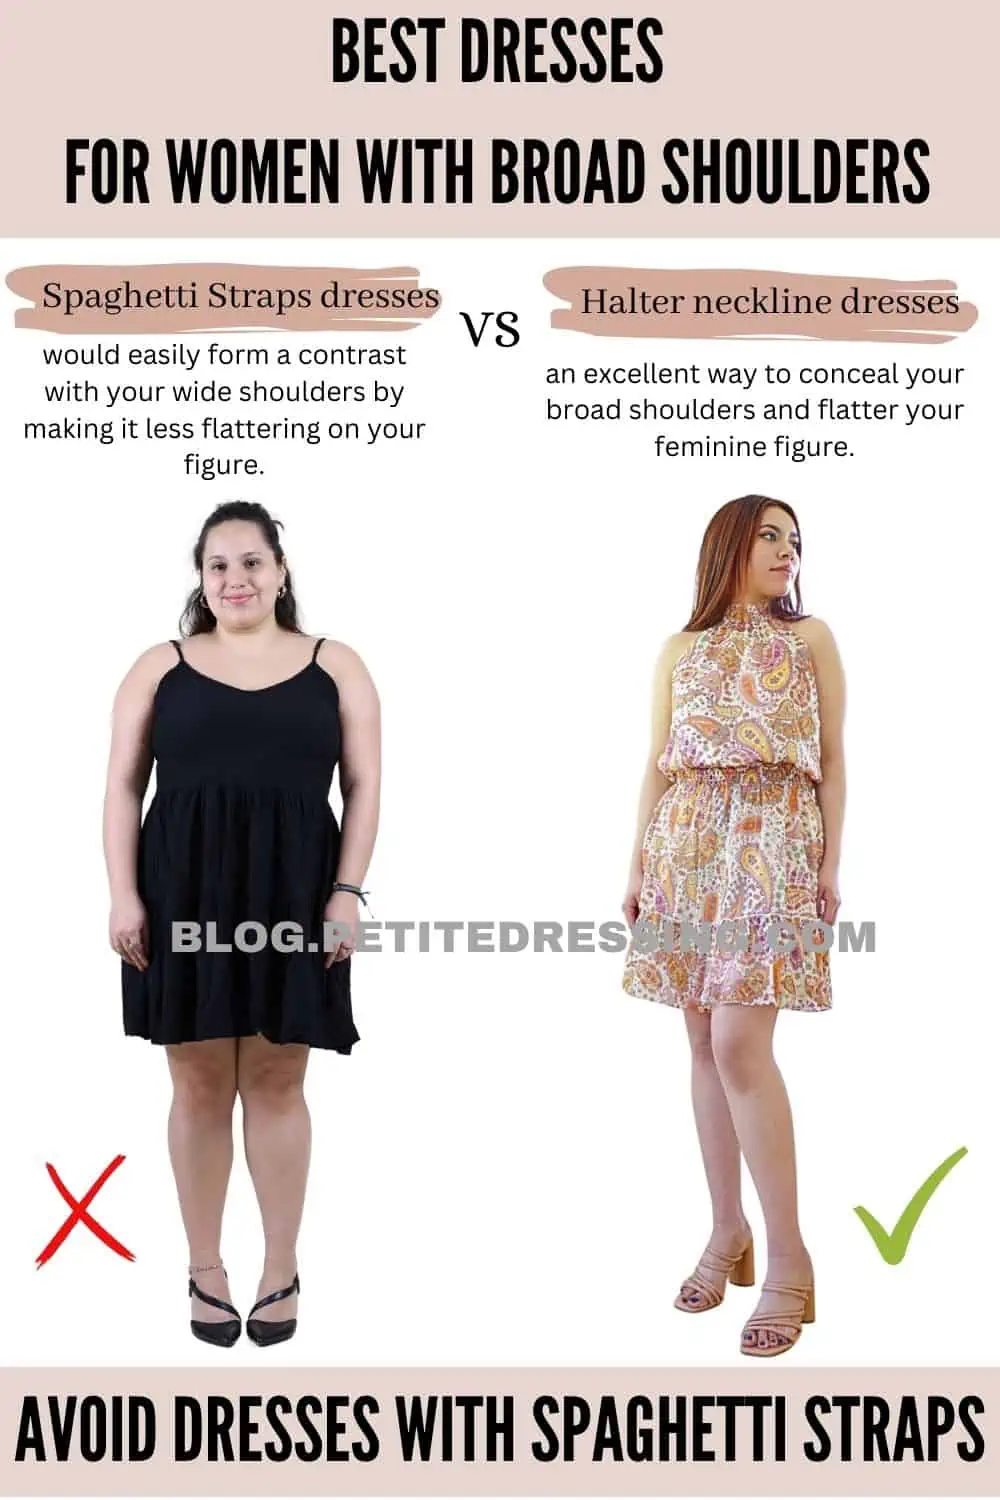 25 Best Dresses for Broad Shoulders: How to Dress Body Type